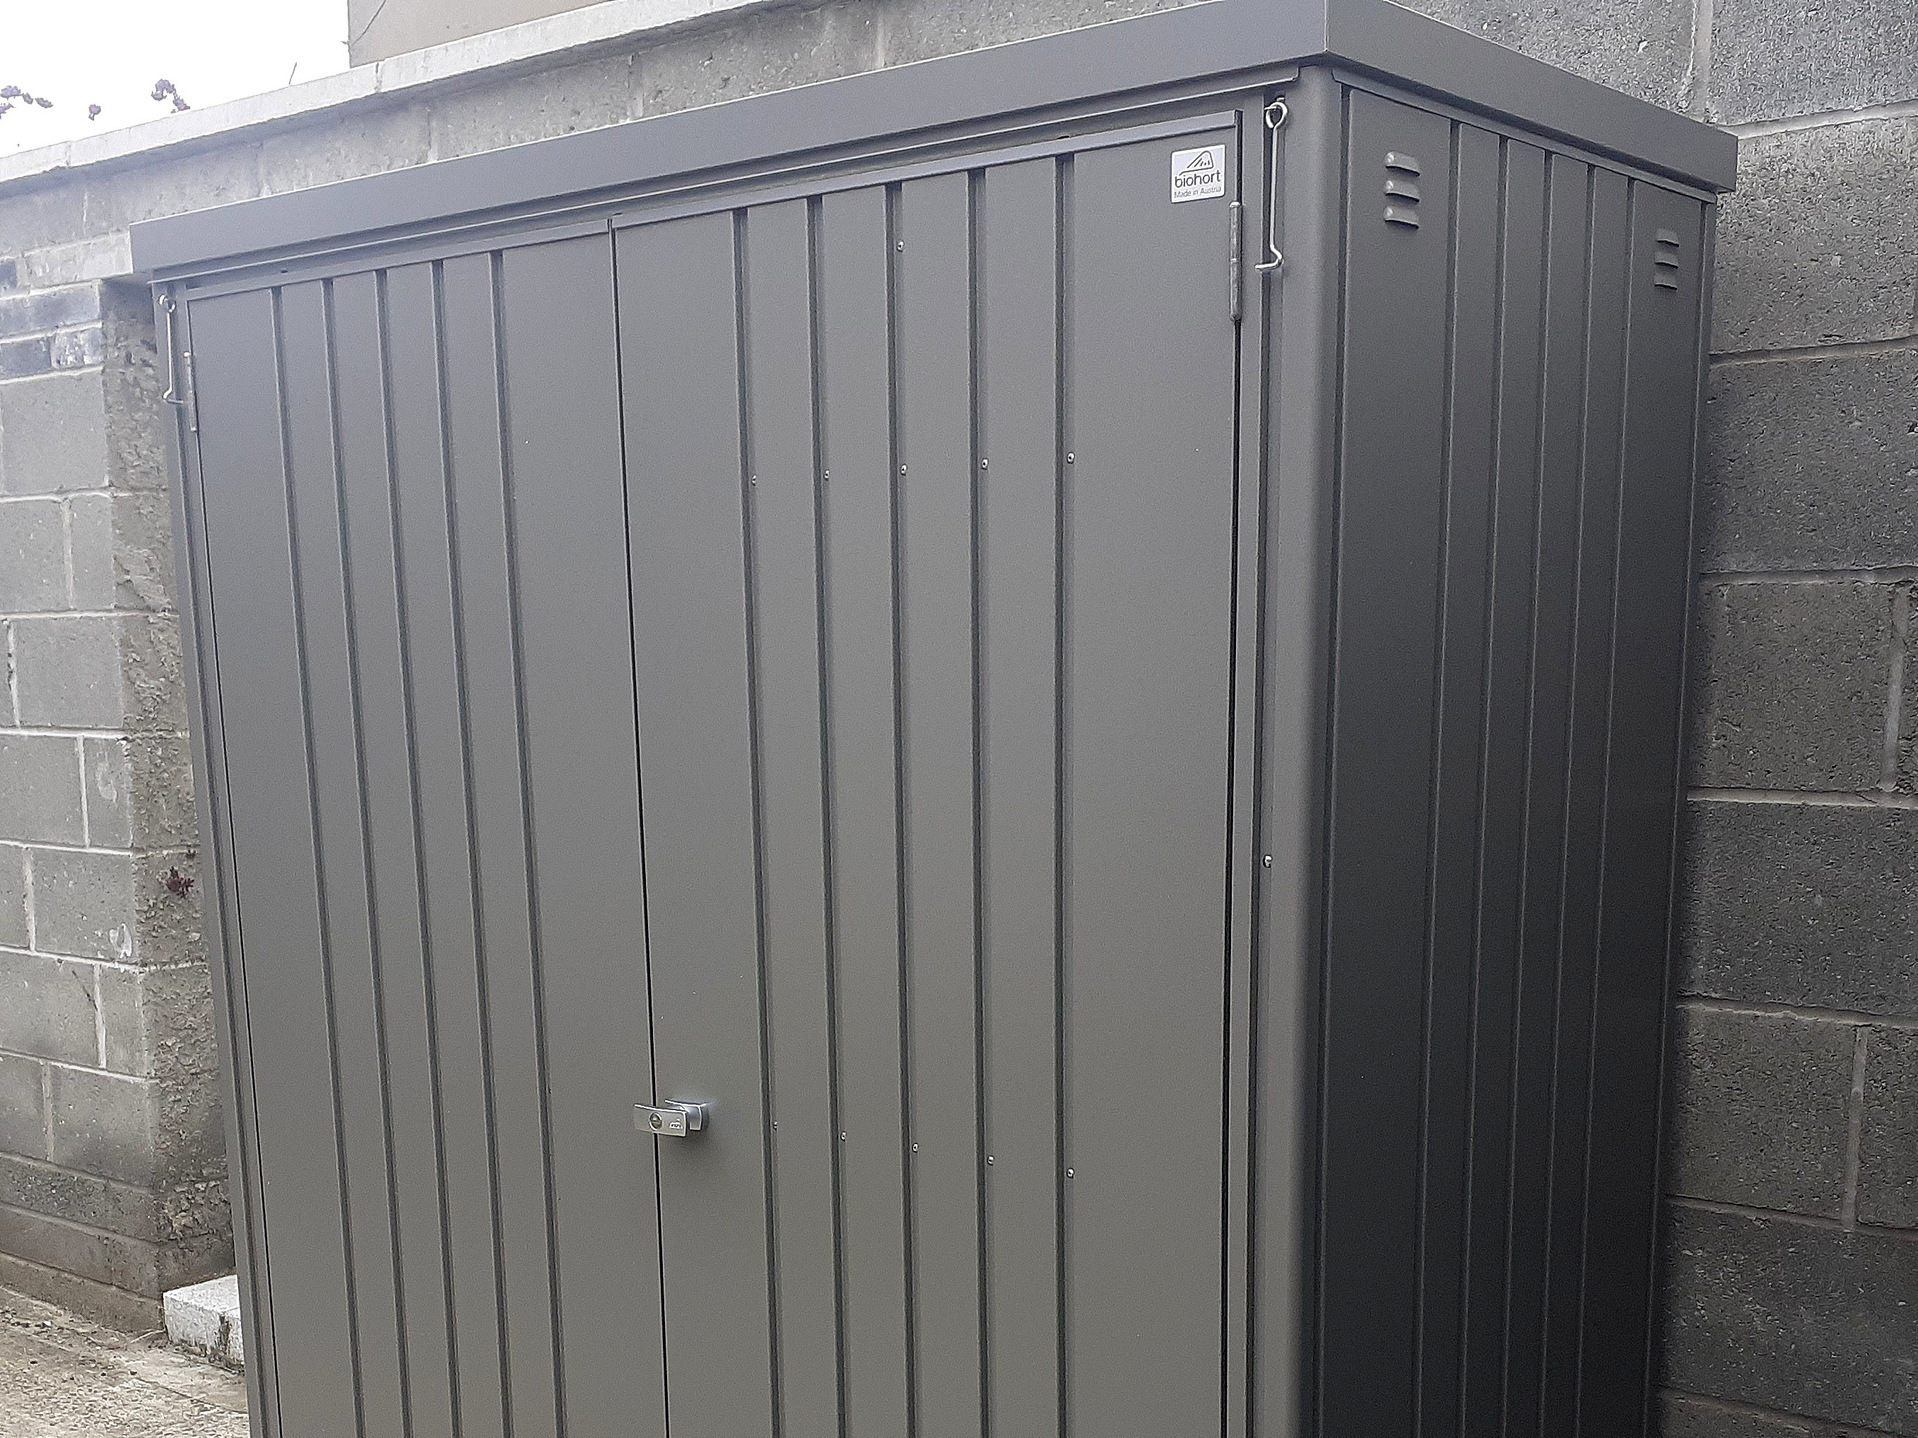 The superb quality and style of the Biohort Equipment Locker 150 in metallic quartz grey  with optional accessories including aluminium floor frame  | supplied + installed in Drumcondra, Dublin 9 by Owen Chubb Landscapers. Tel 087-2306 128.